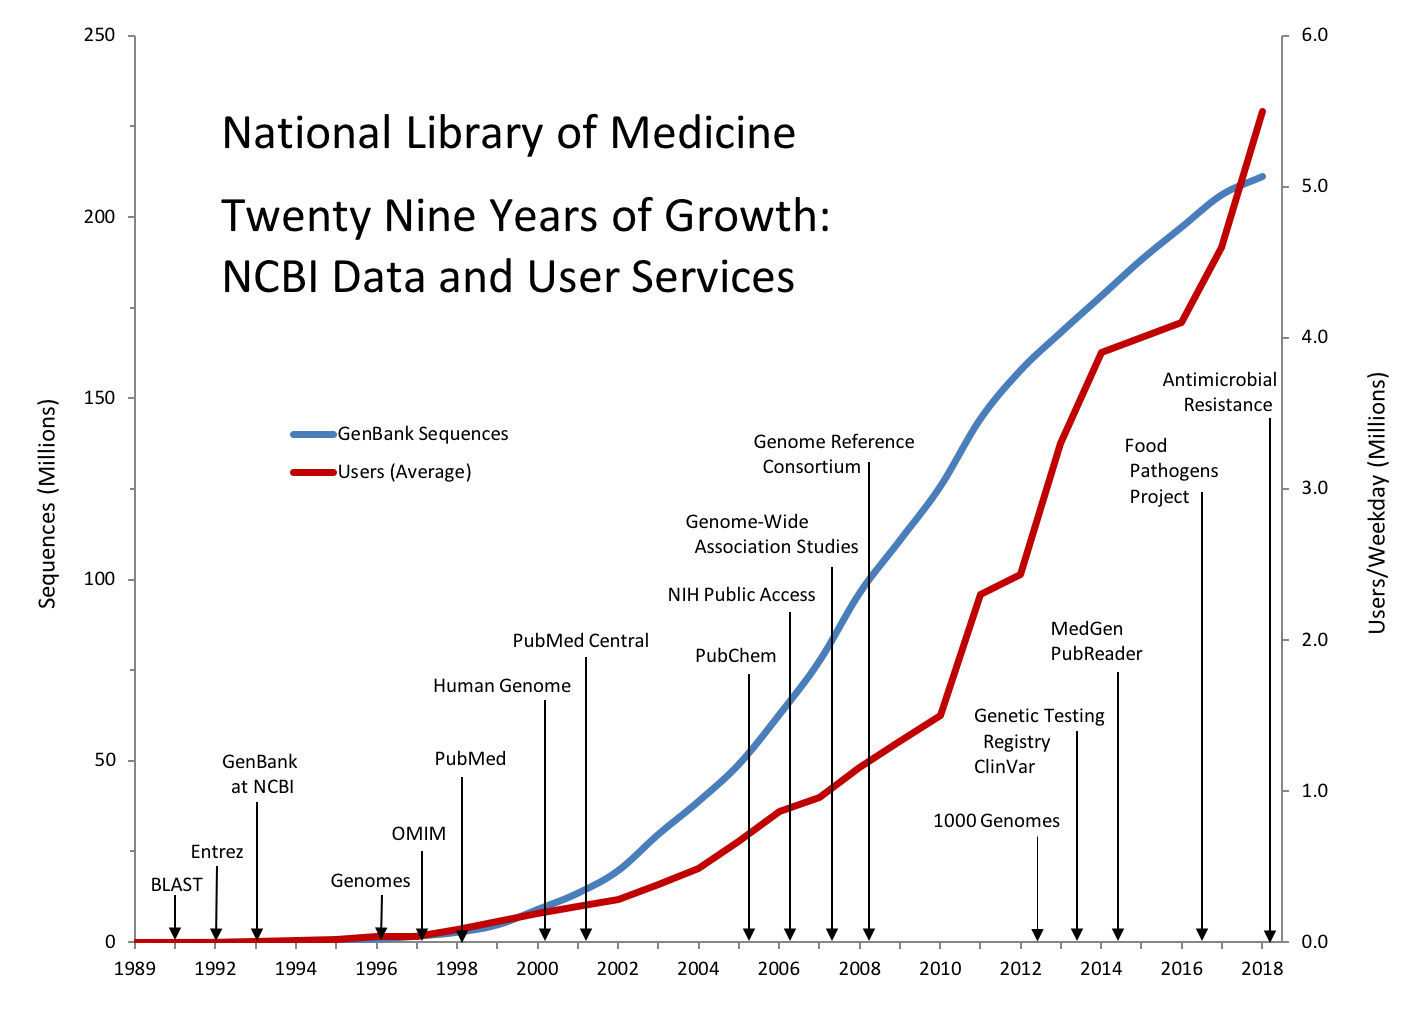 29 Years of Growth for NCBI Data and User Services